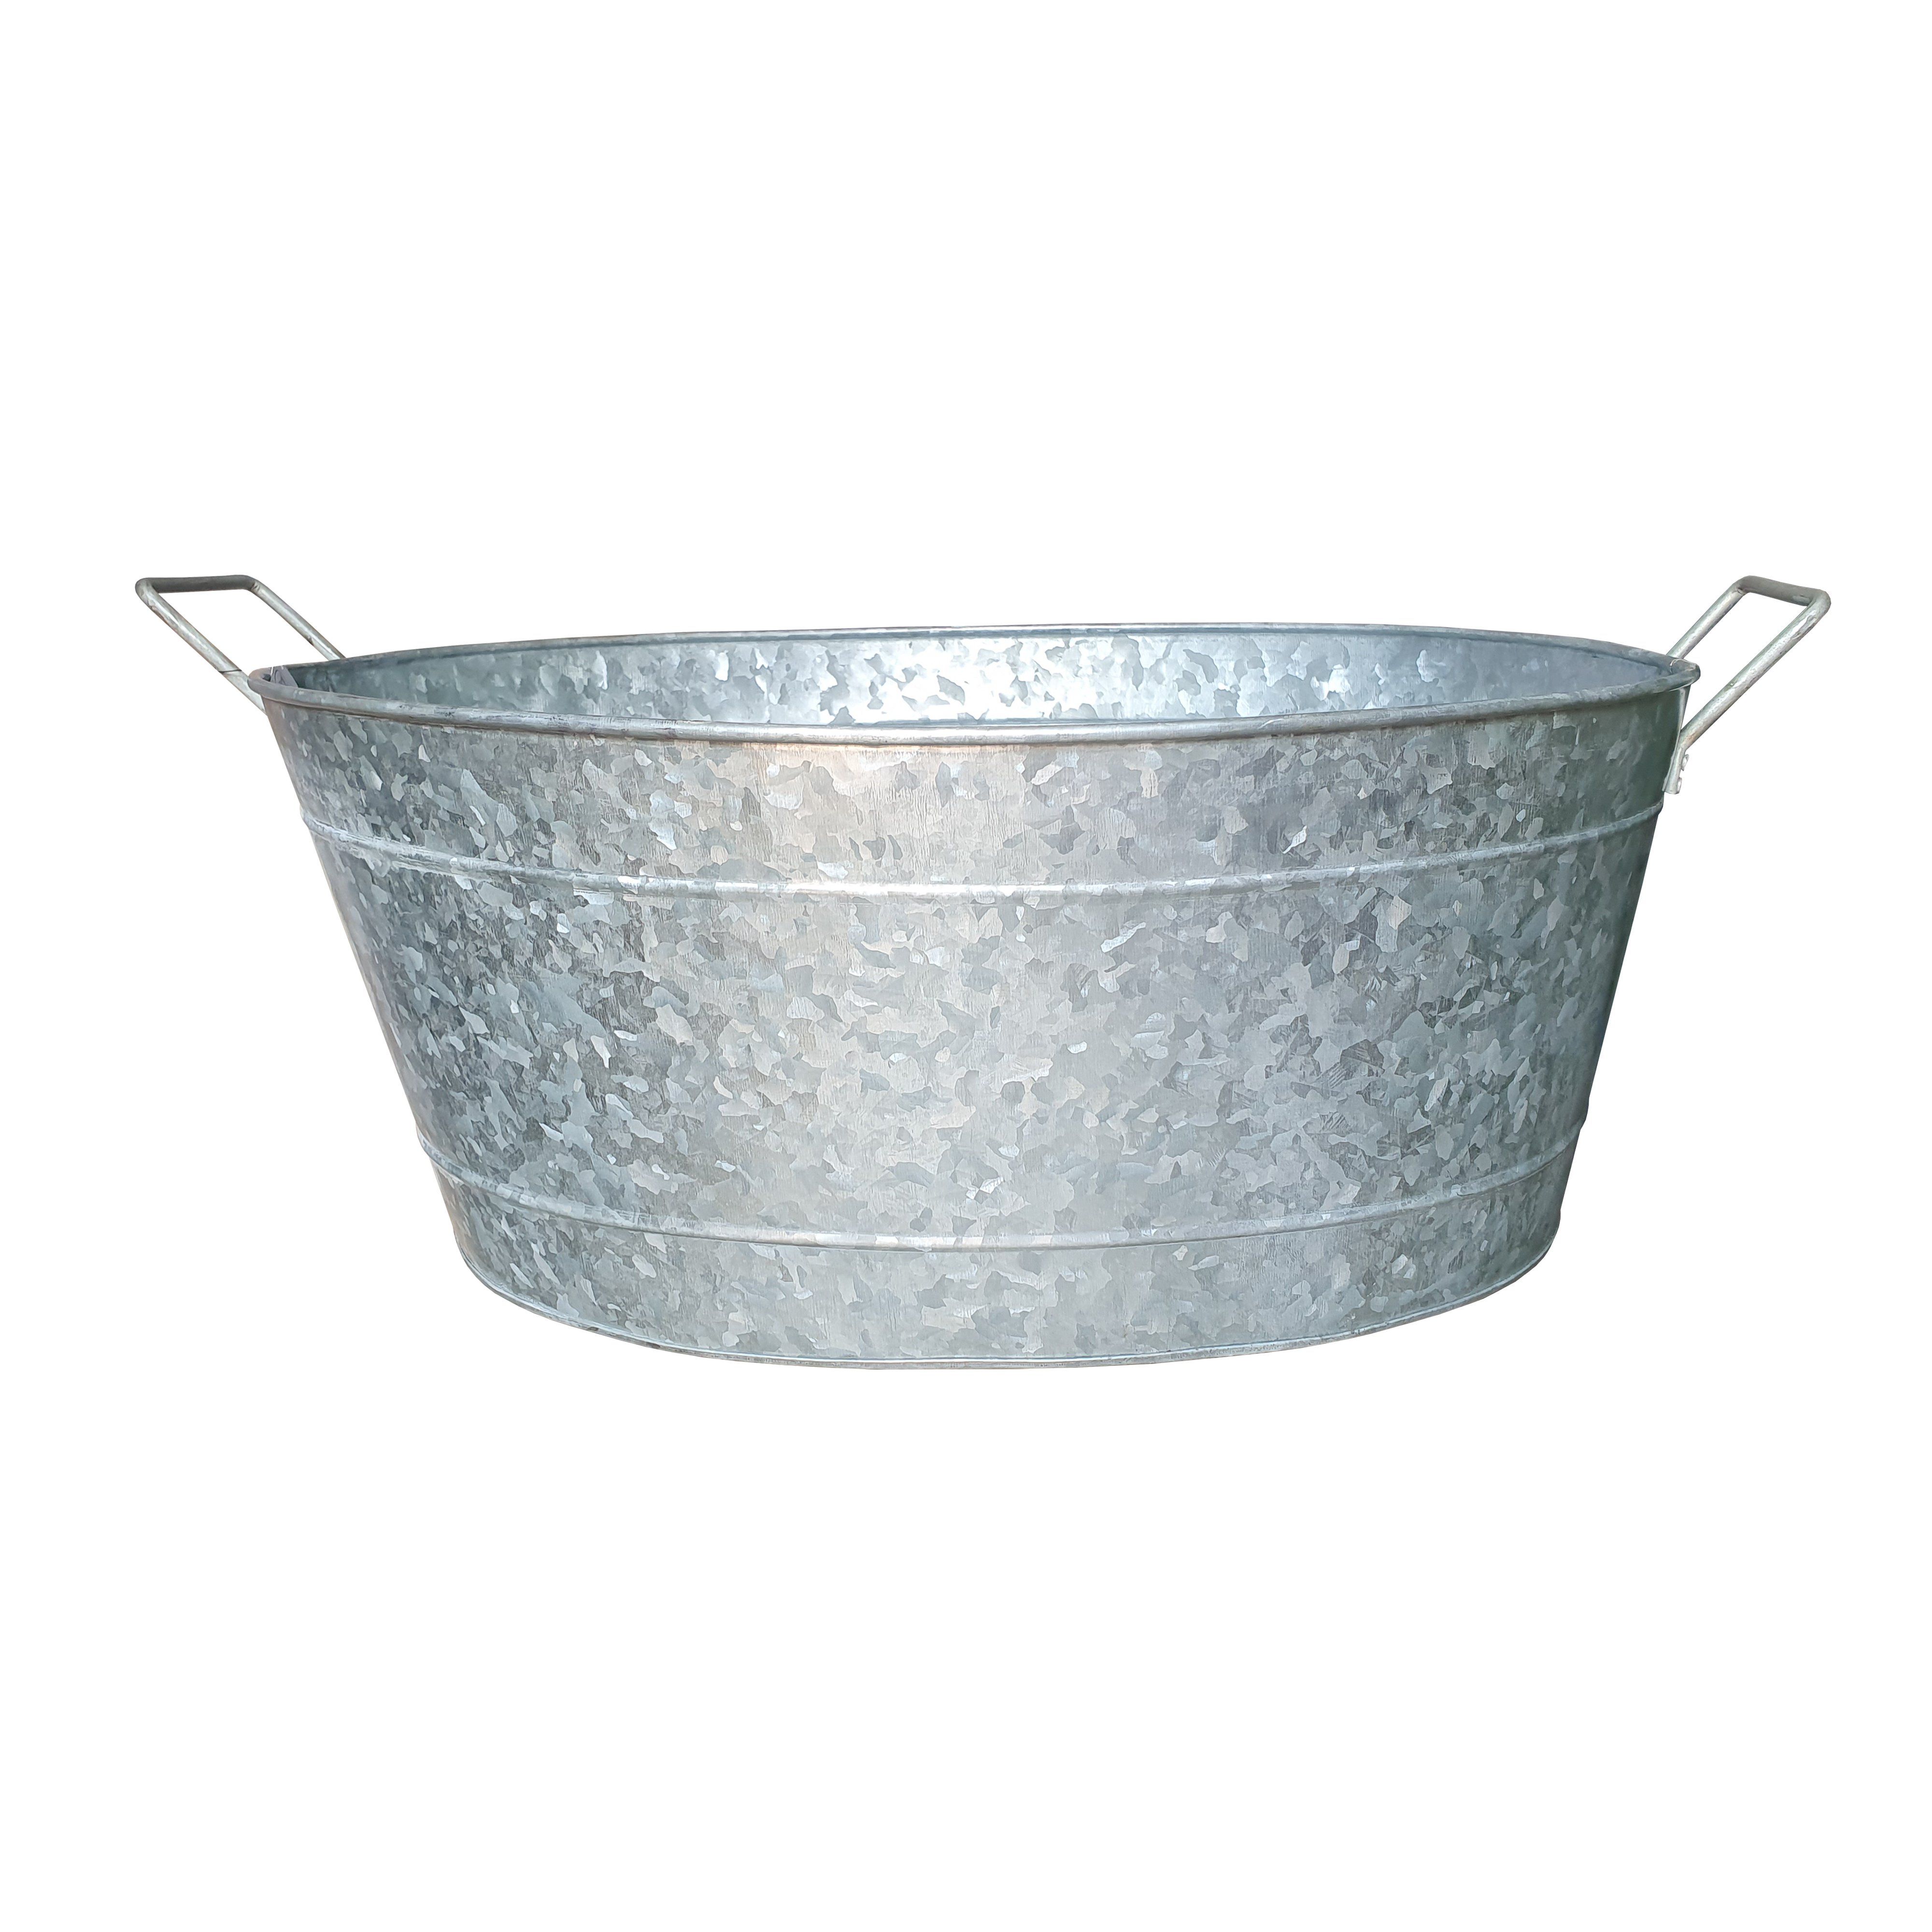 Embossed Design Oval Shape Galvanized Steel Tub With Side Handles, Small, Silver- Saltoro Sherpi